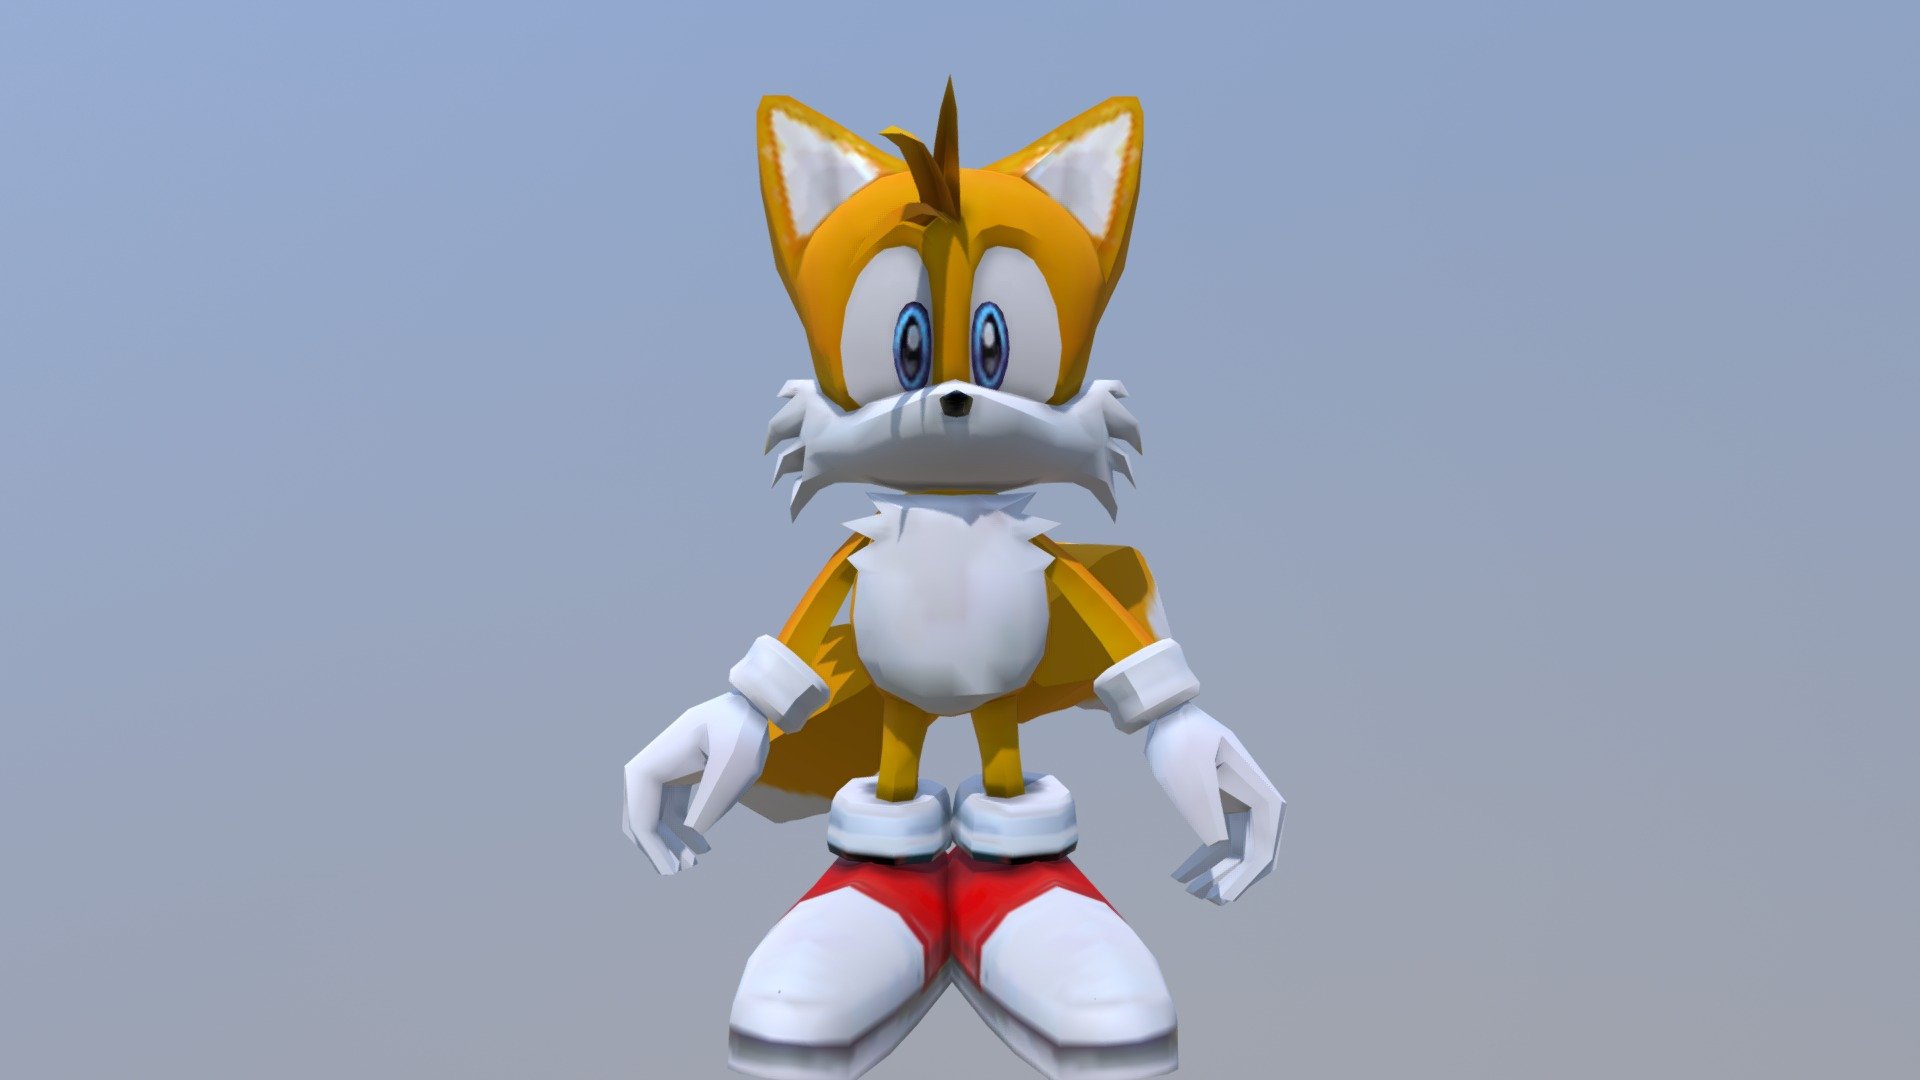 download sonic tails new home